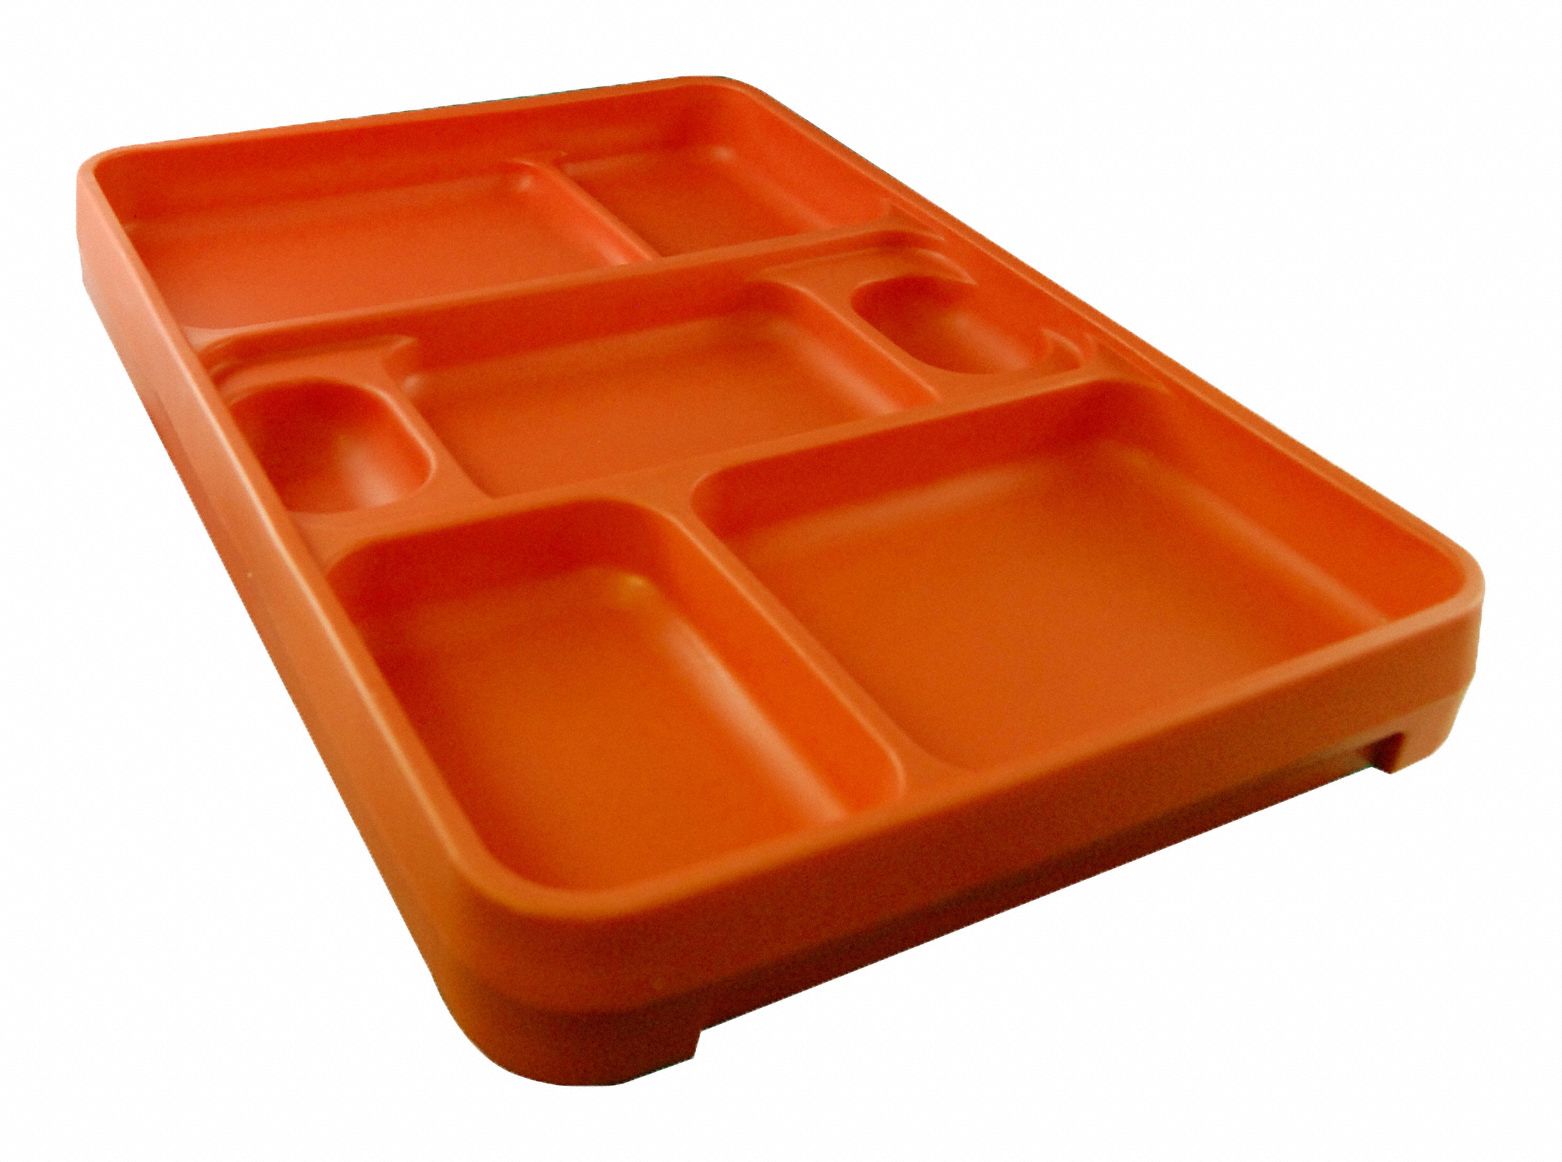 Rock 2.0 Food Trays Orange: w/ Compartments, 14 1/4 in Overall Lg, 9 1/2 in Overall Wd, 10 PK